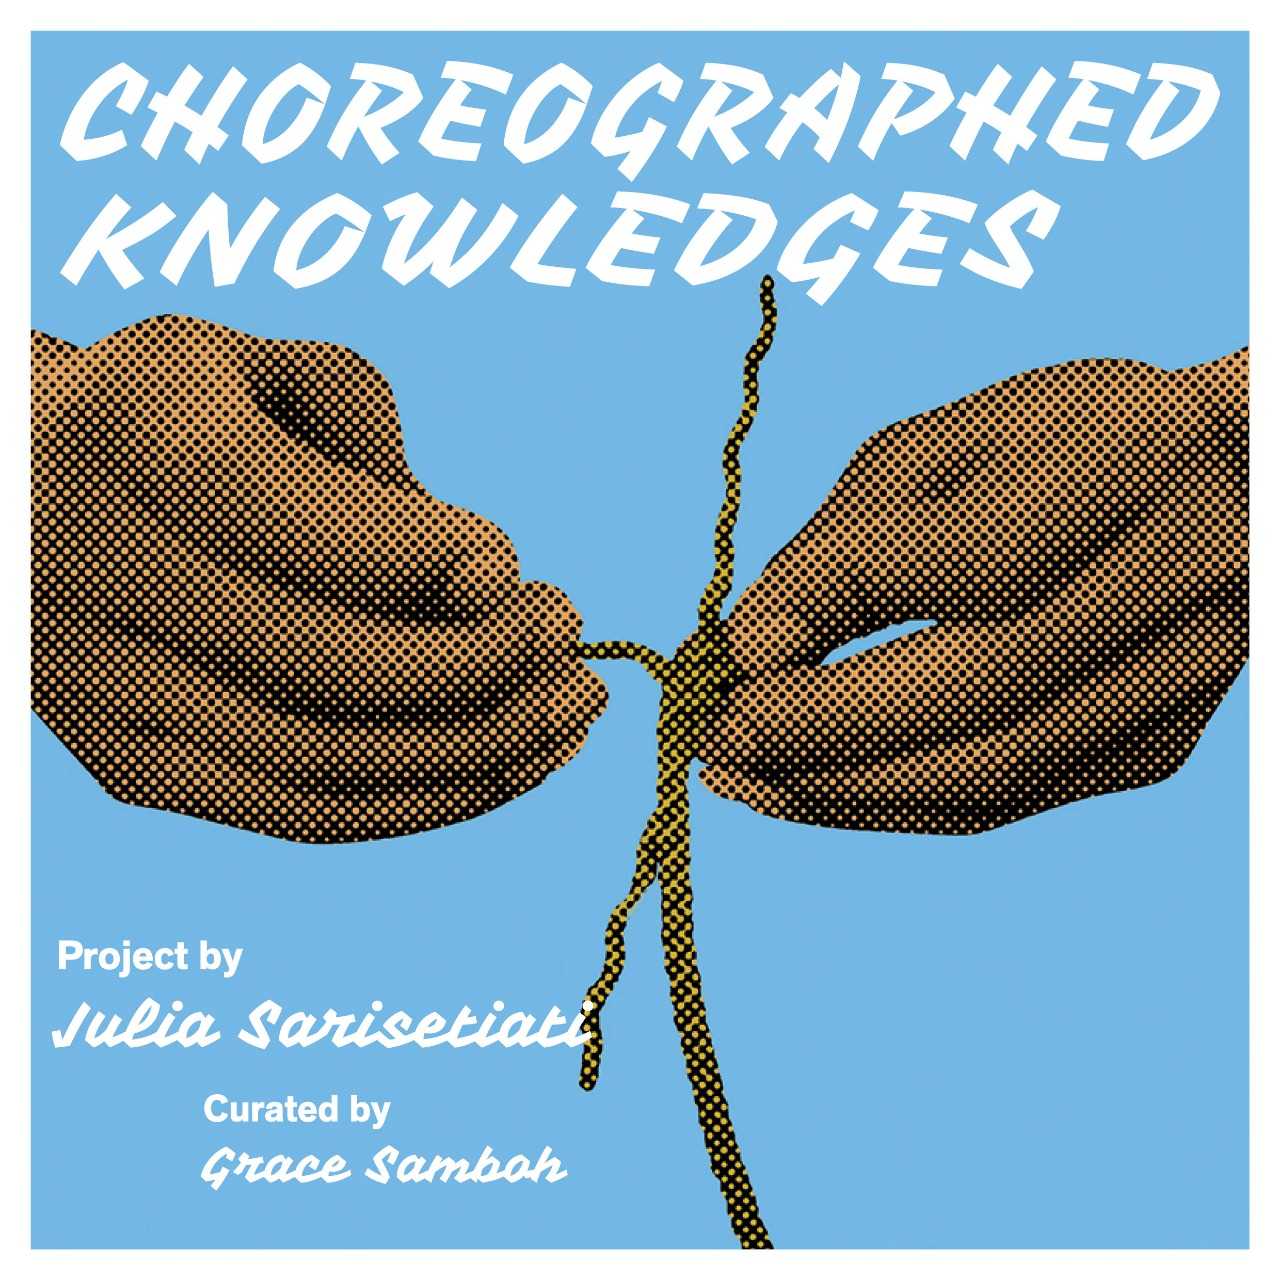 Choreographed Knowledges, a project by Julia Sarisetiati curated by Grace Samboh